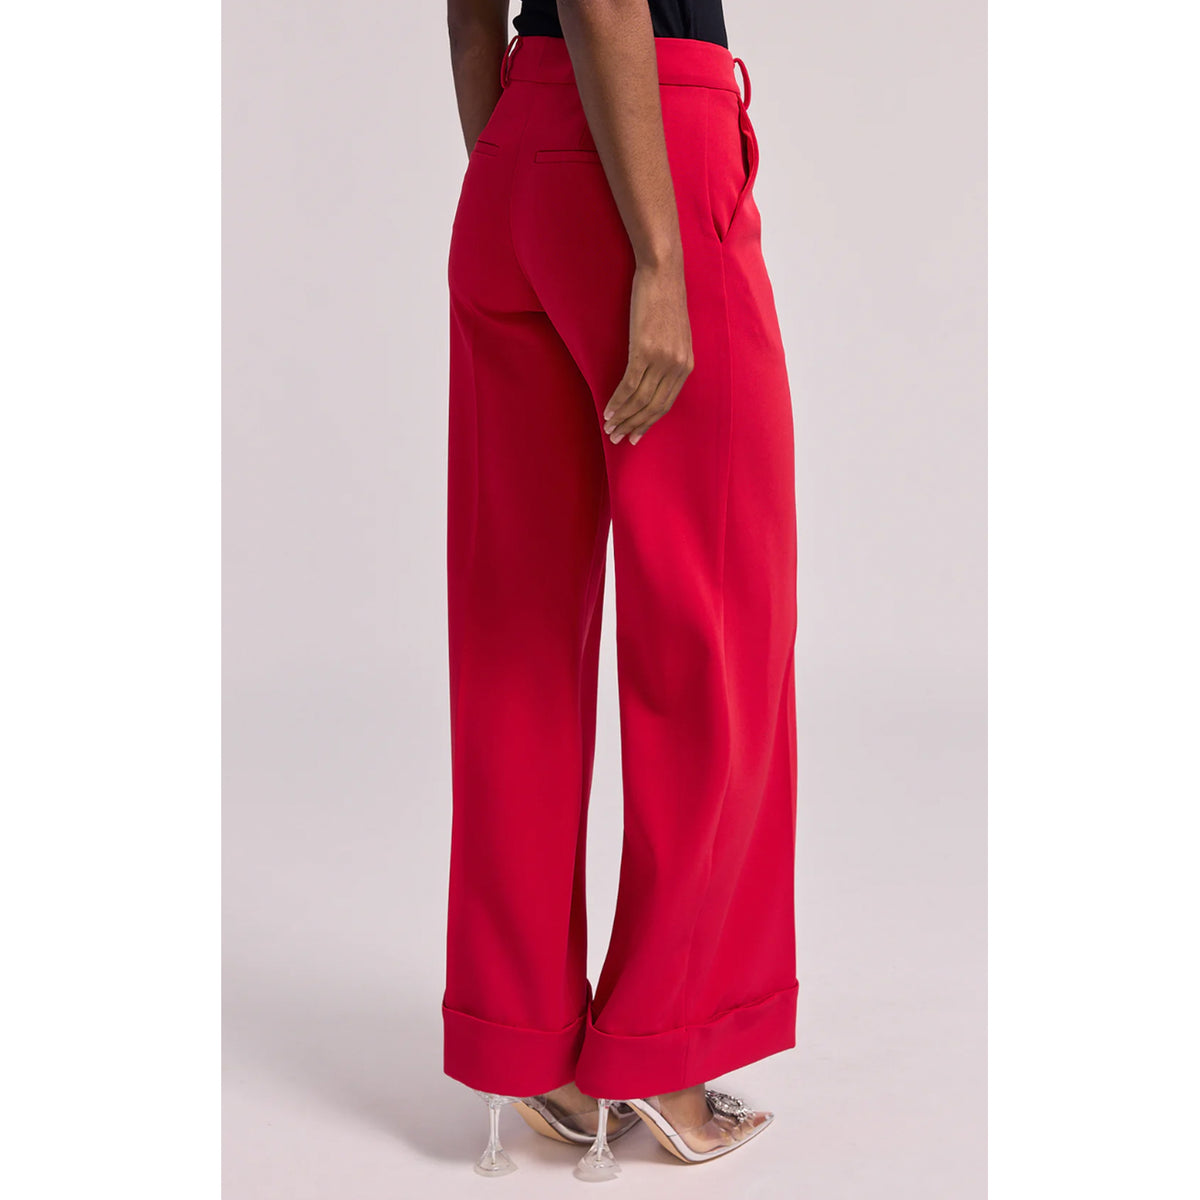 Generation Love Mavis High Waisted Pant in Rouge